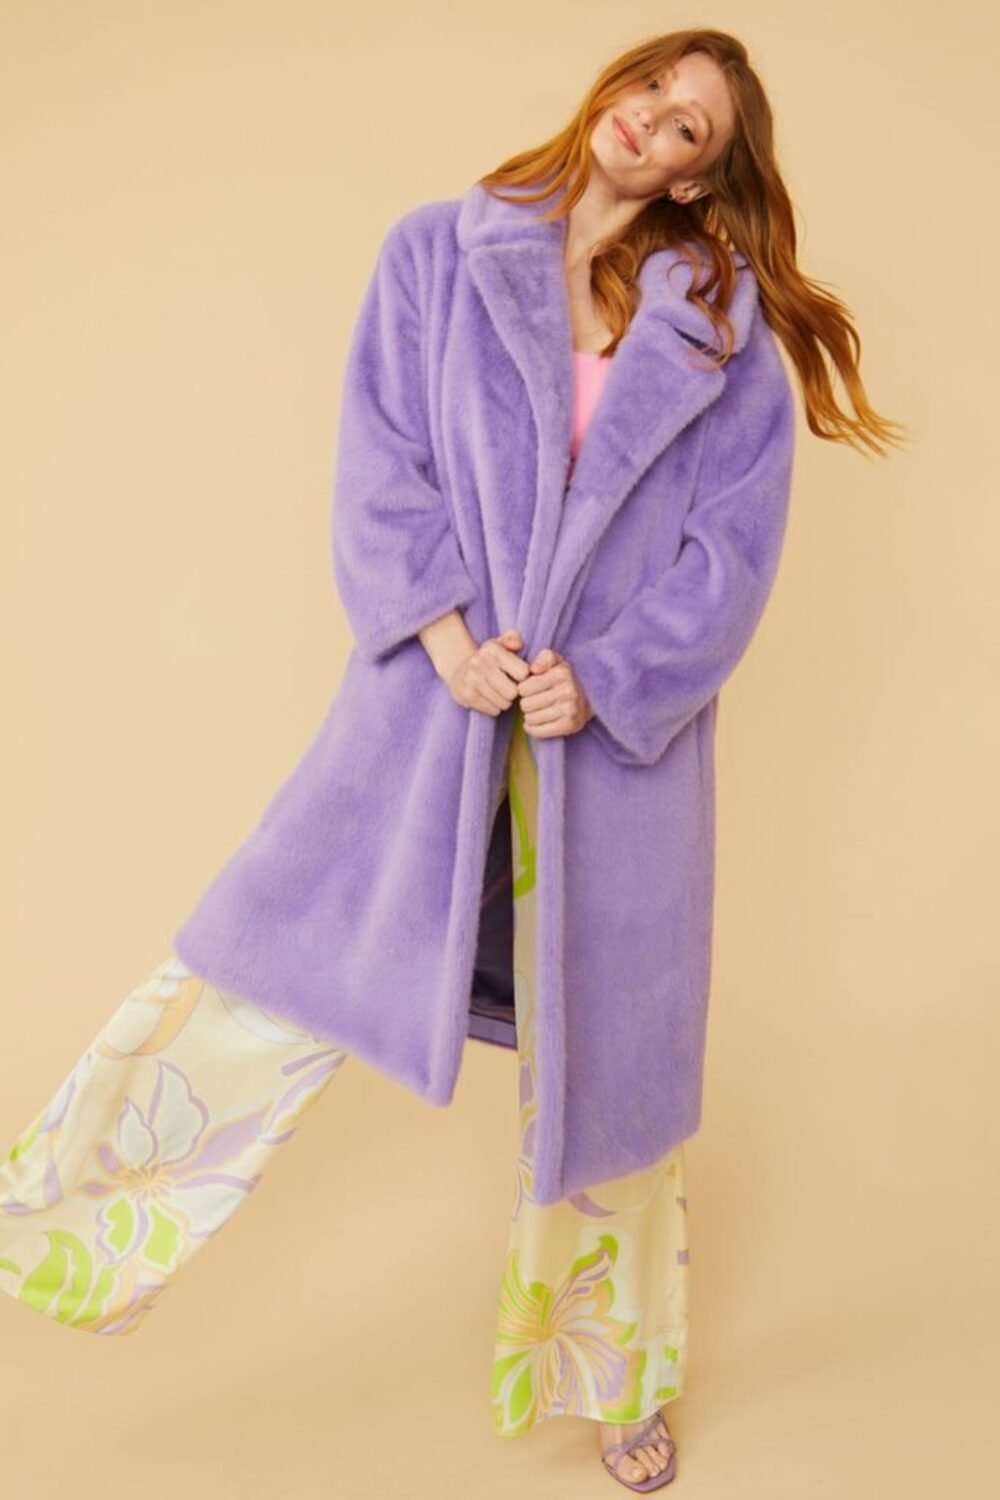 Shop Lux Purple Faux Fur Midi Coat and women's luxury and designer clothes at www.lux-apparel.co.uk